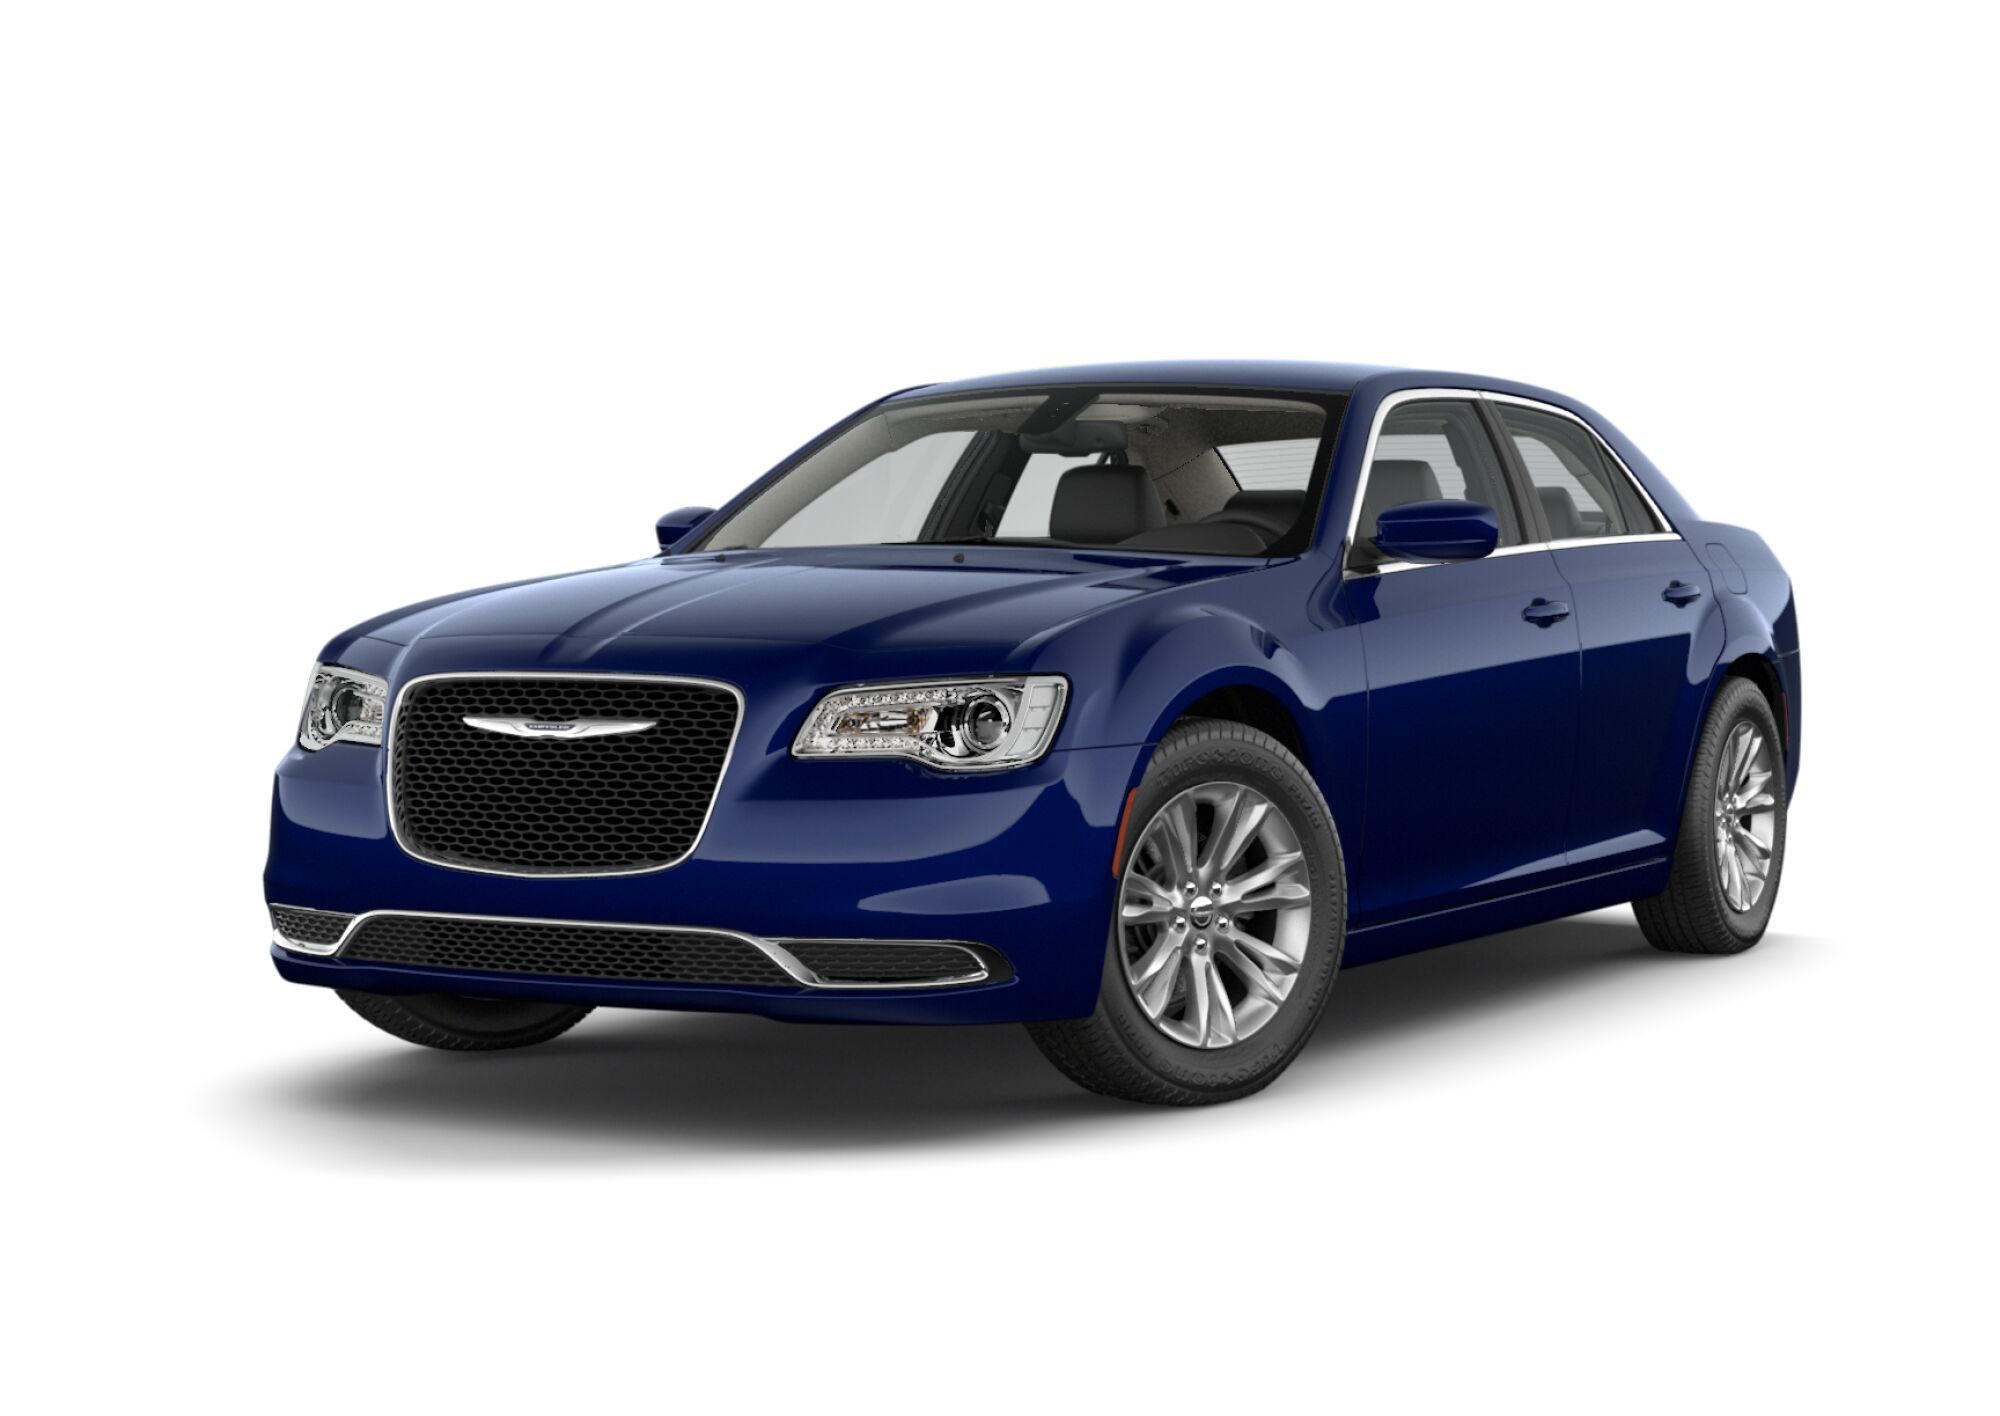 2021 Chrysler 300 Touring L Full Specs Features And Price Carbuzz ...